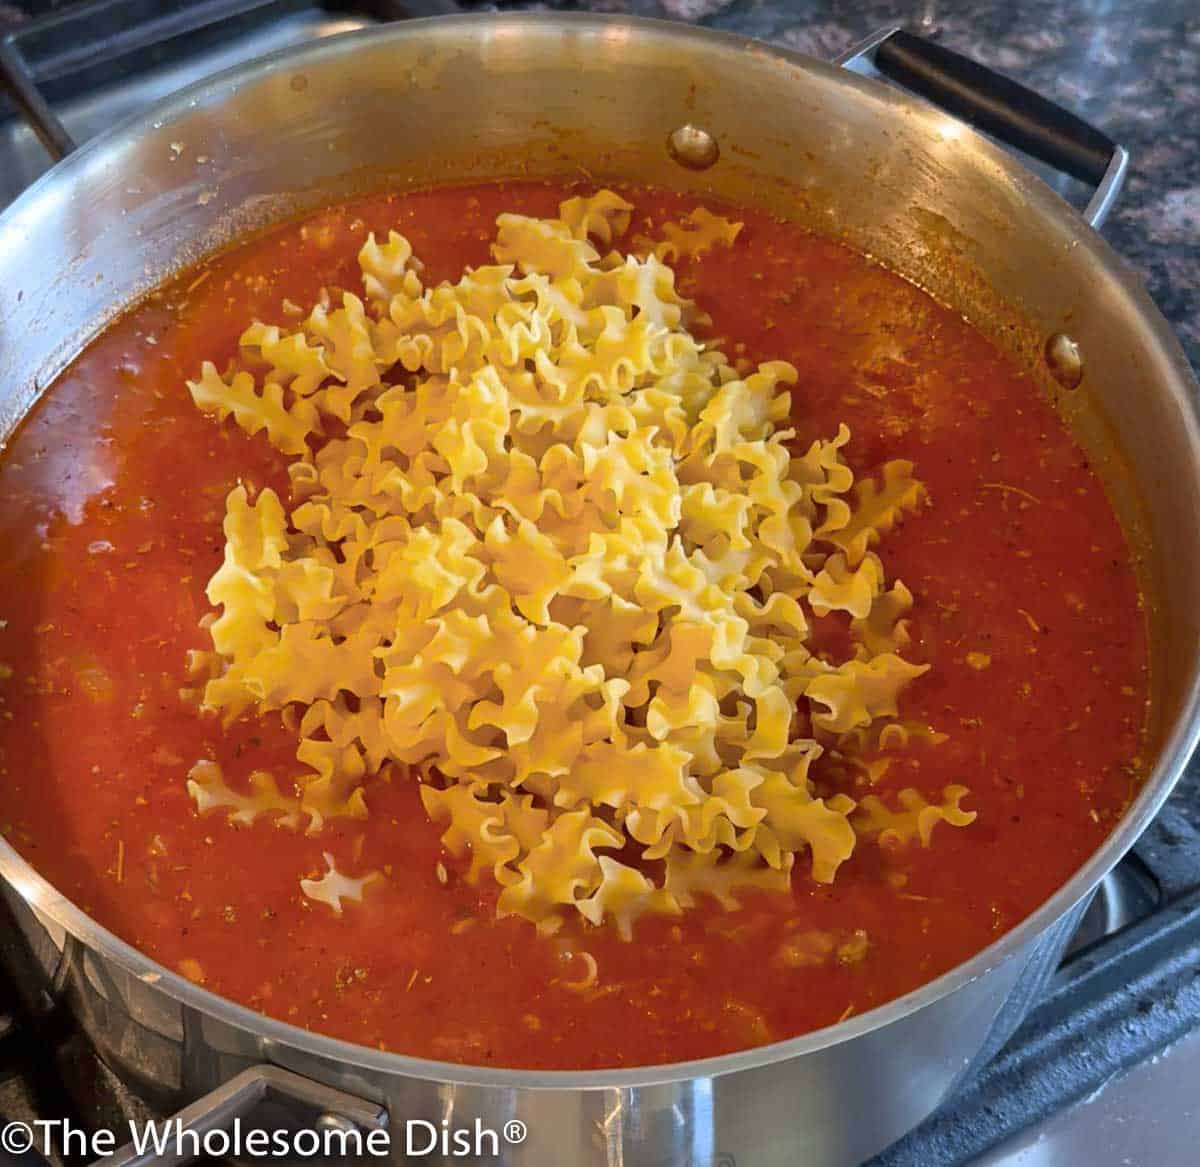 Mini lasagna noodles being added to the pot.